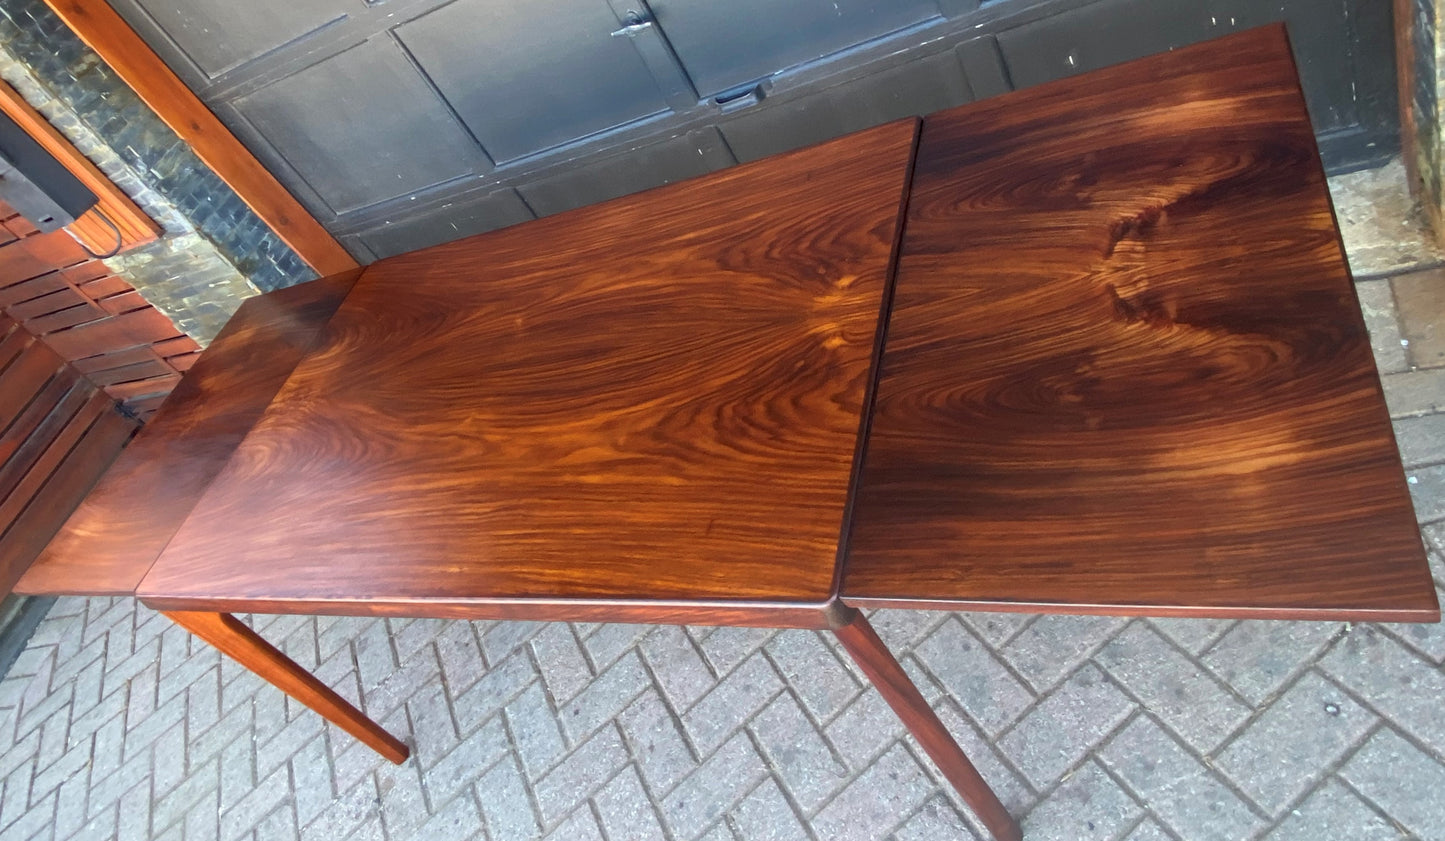 REFINISHED Danish MCM Rosewood Draw Leaf Table by H. Kjaernulf  55.5" - 94.5" PERFECT